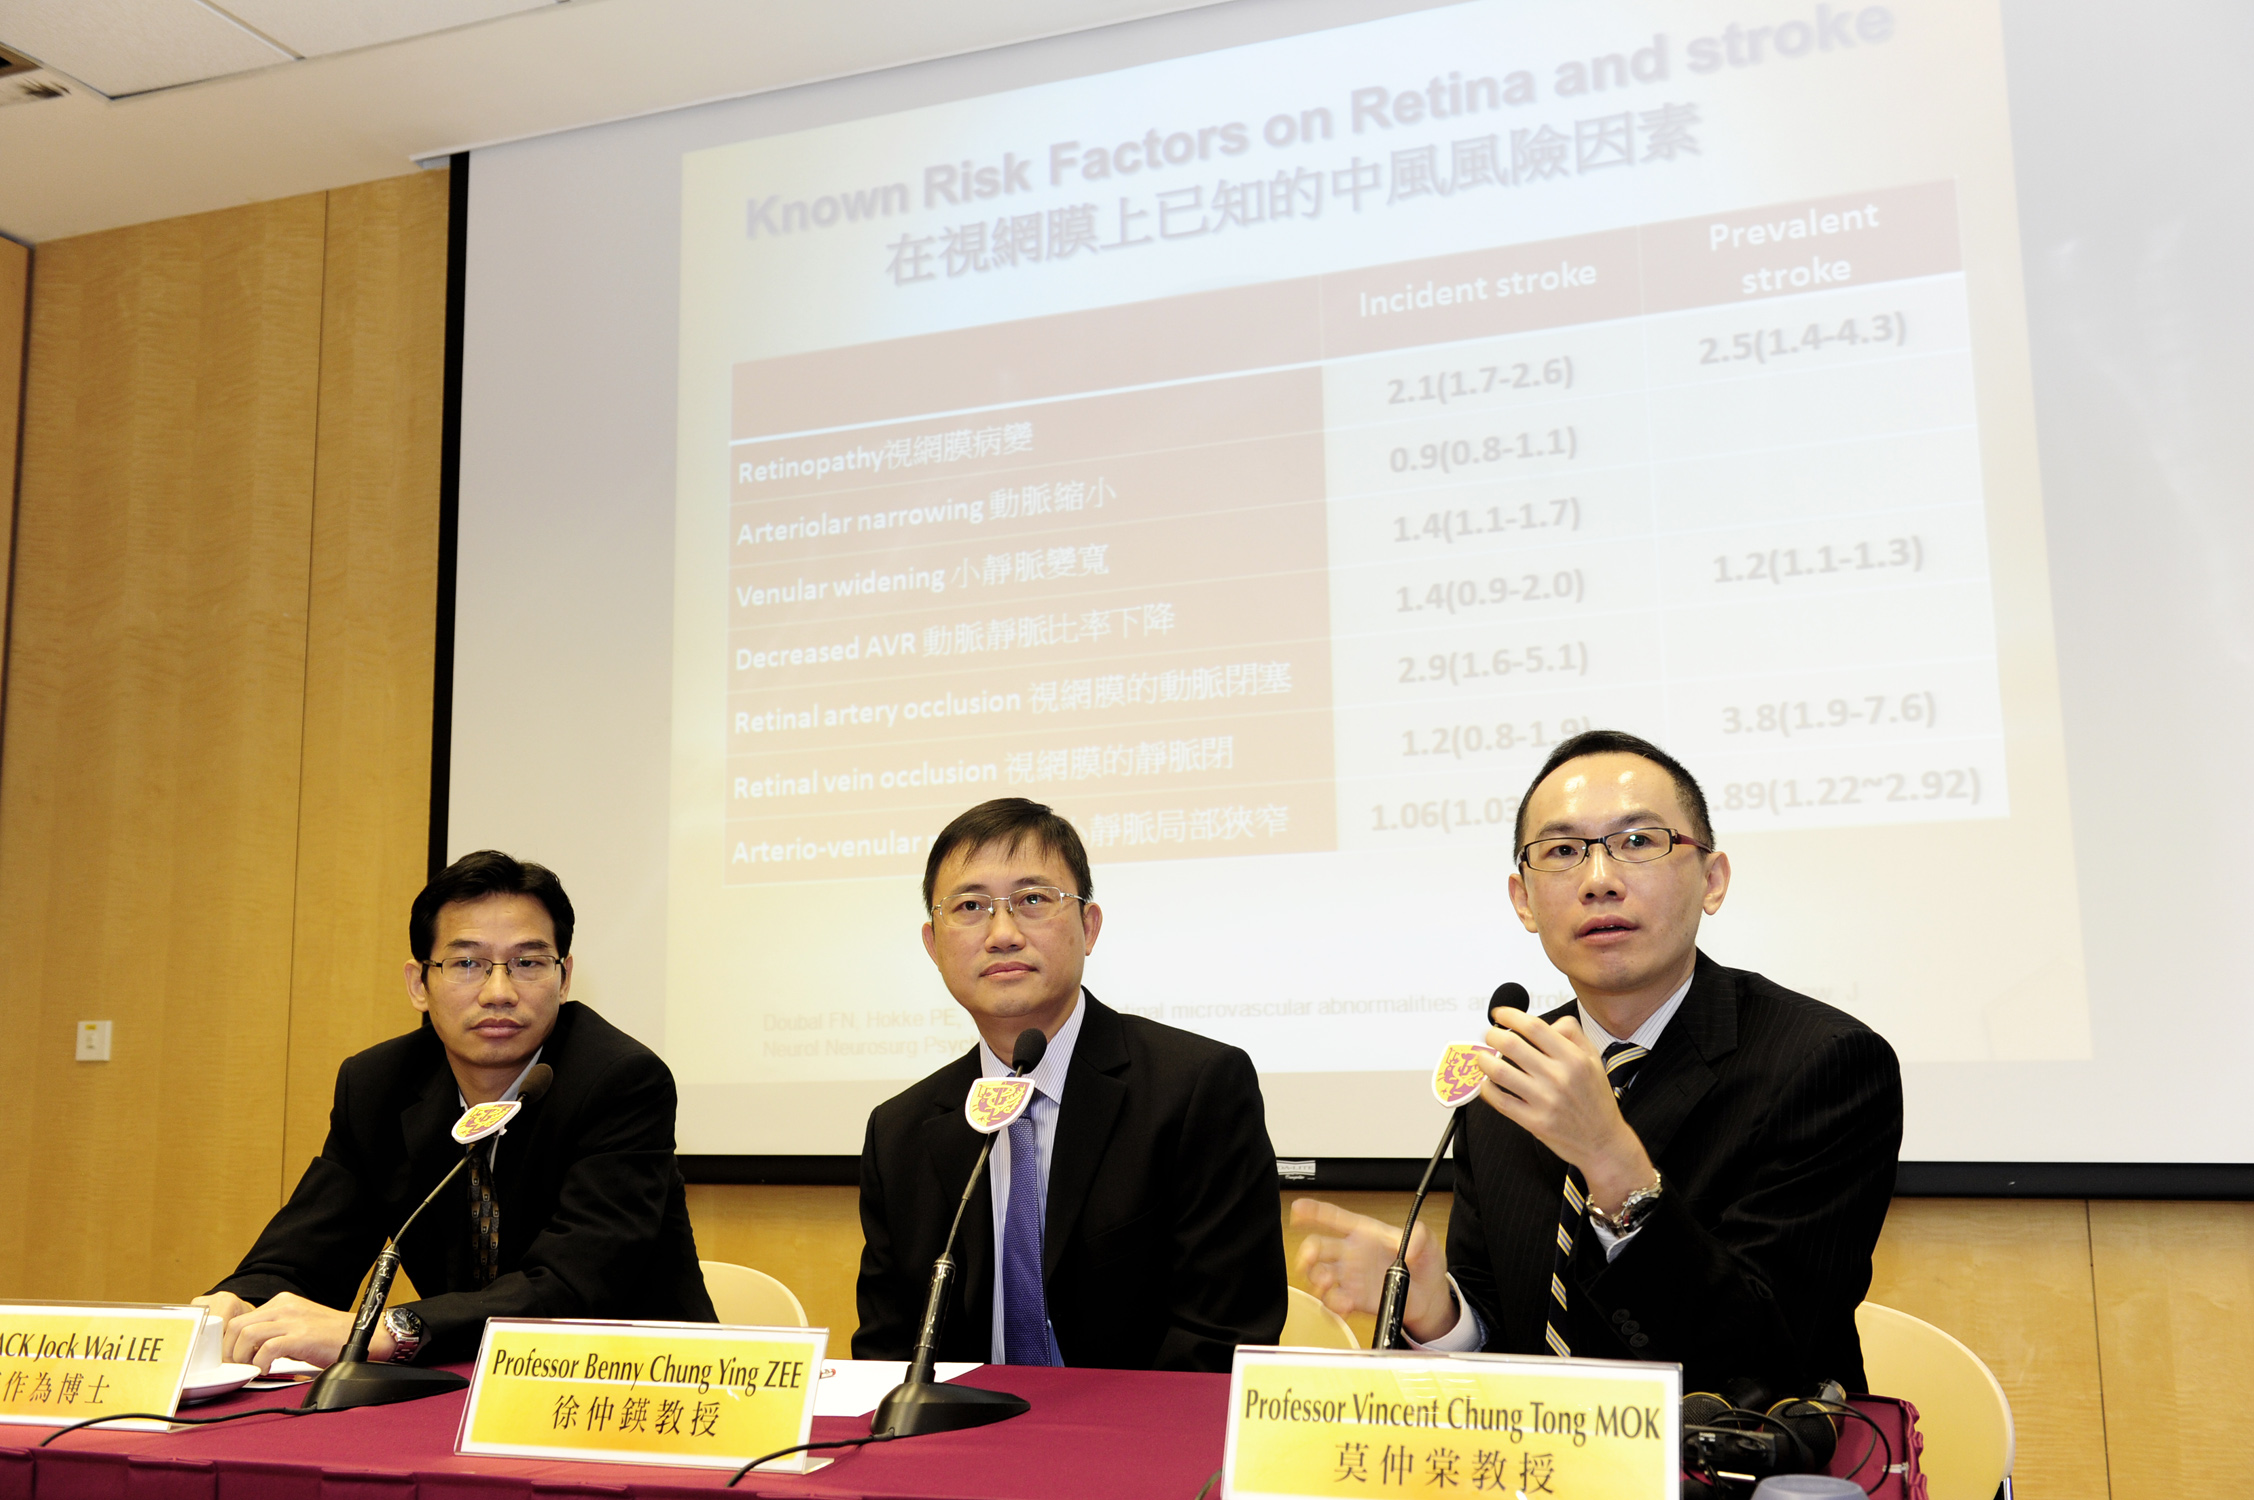 From left: Dr Jack Jock Wai LEE, Biostatistician, Division of Biostatistics, The Jockey Club School of Public Health and Primary Care; Prof. Benny Chung Ying ZEE, Head of Division, Division of Biostatistics, The Jockey Club School of Public Health and Primary Care; and Prof. Vincent Chung Tong MOK, Professor, Division of Neurology, Department of Medicine and Therapeutics at CUHK present their recent research on the use of an automatic retinal image analysis system would help diabetes patients to assess cerebral vessels condition and evaluate the risk of stroke